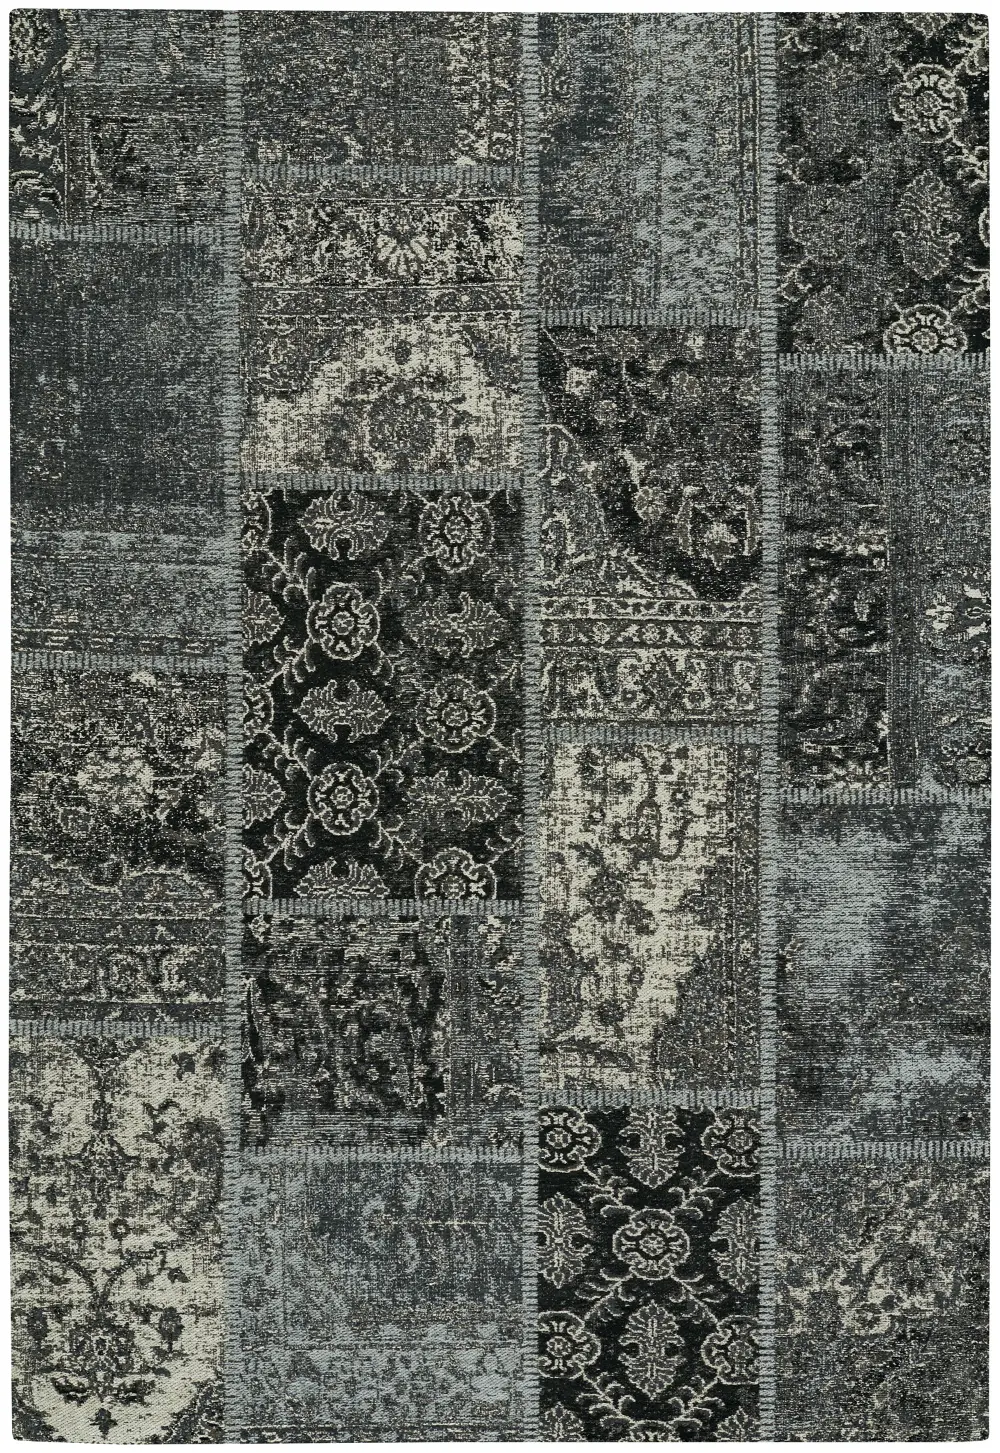 3246RS08001000350 8 x 10 Large Silver and Black Area Rug - Cosmic-Patchwork-1